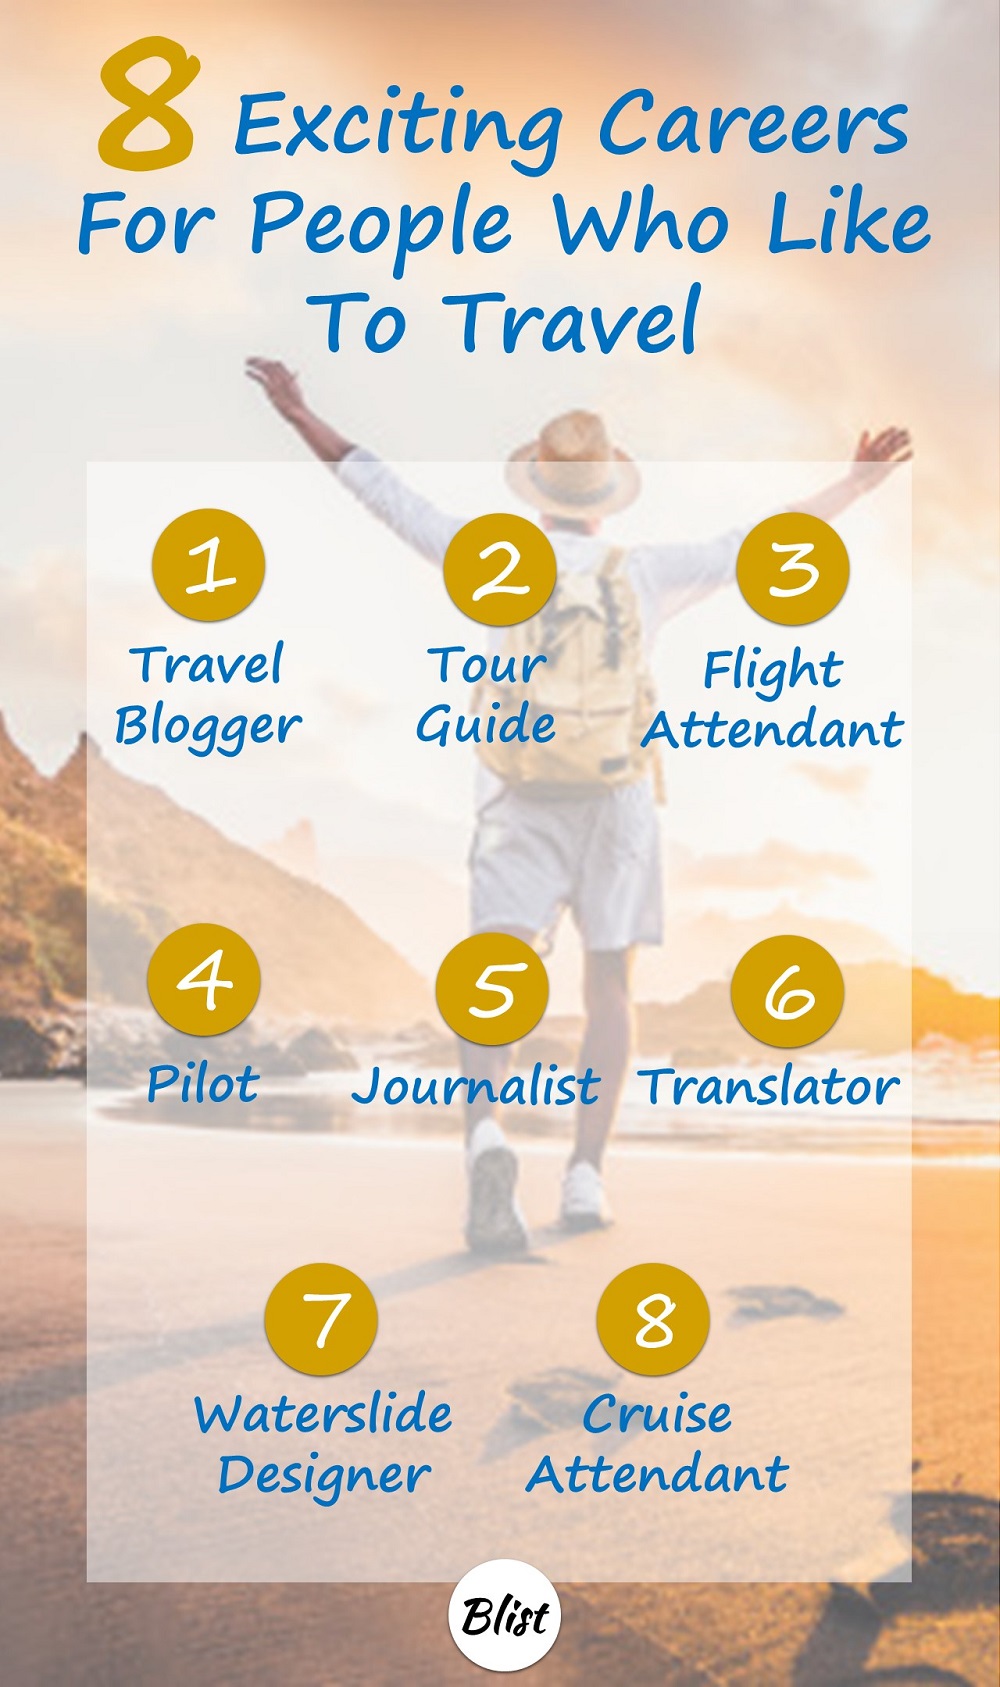 8 Exciting Careers For People Who Like To Travel